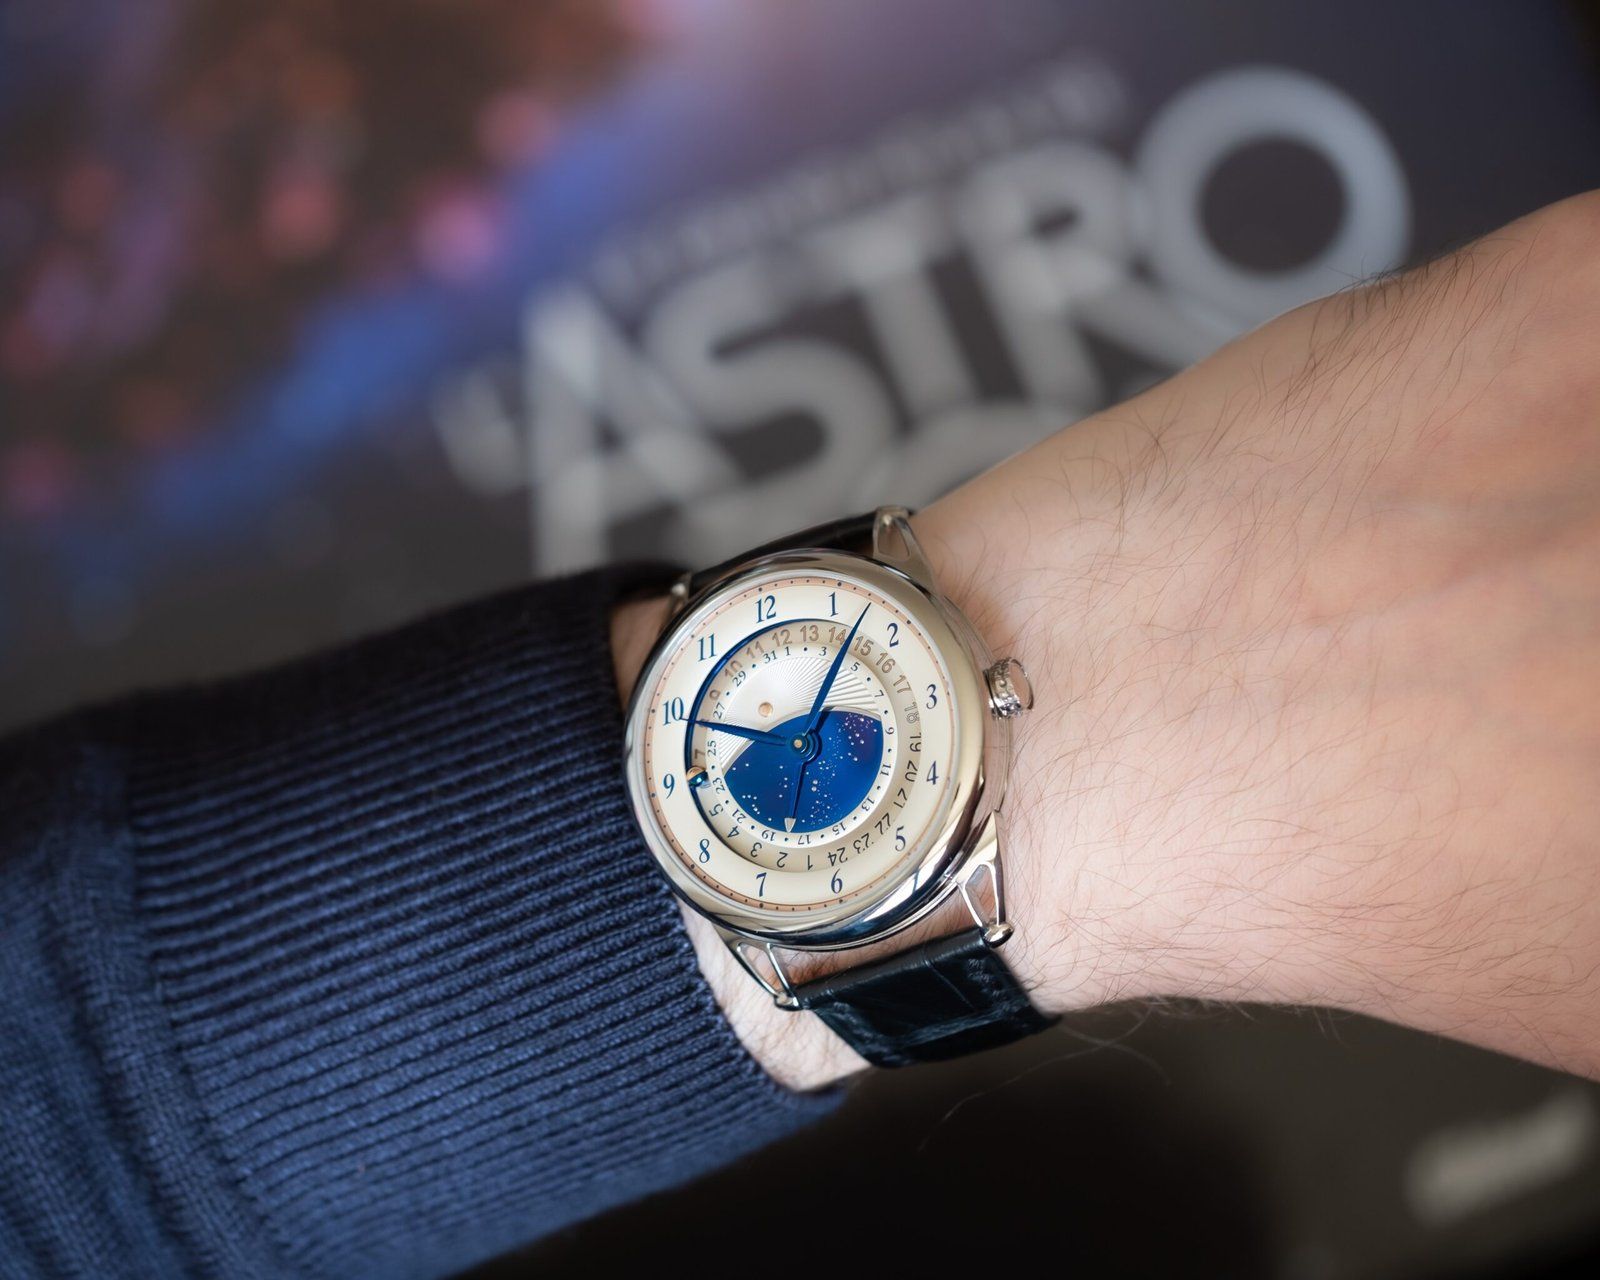 FEATURED: The De Bethune DB25GMT Starry Varius